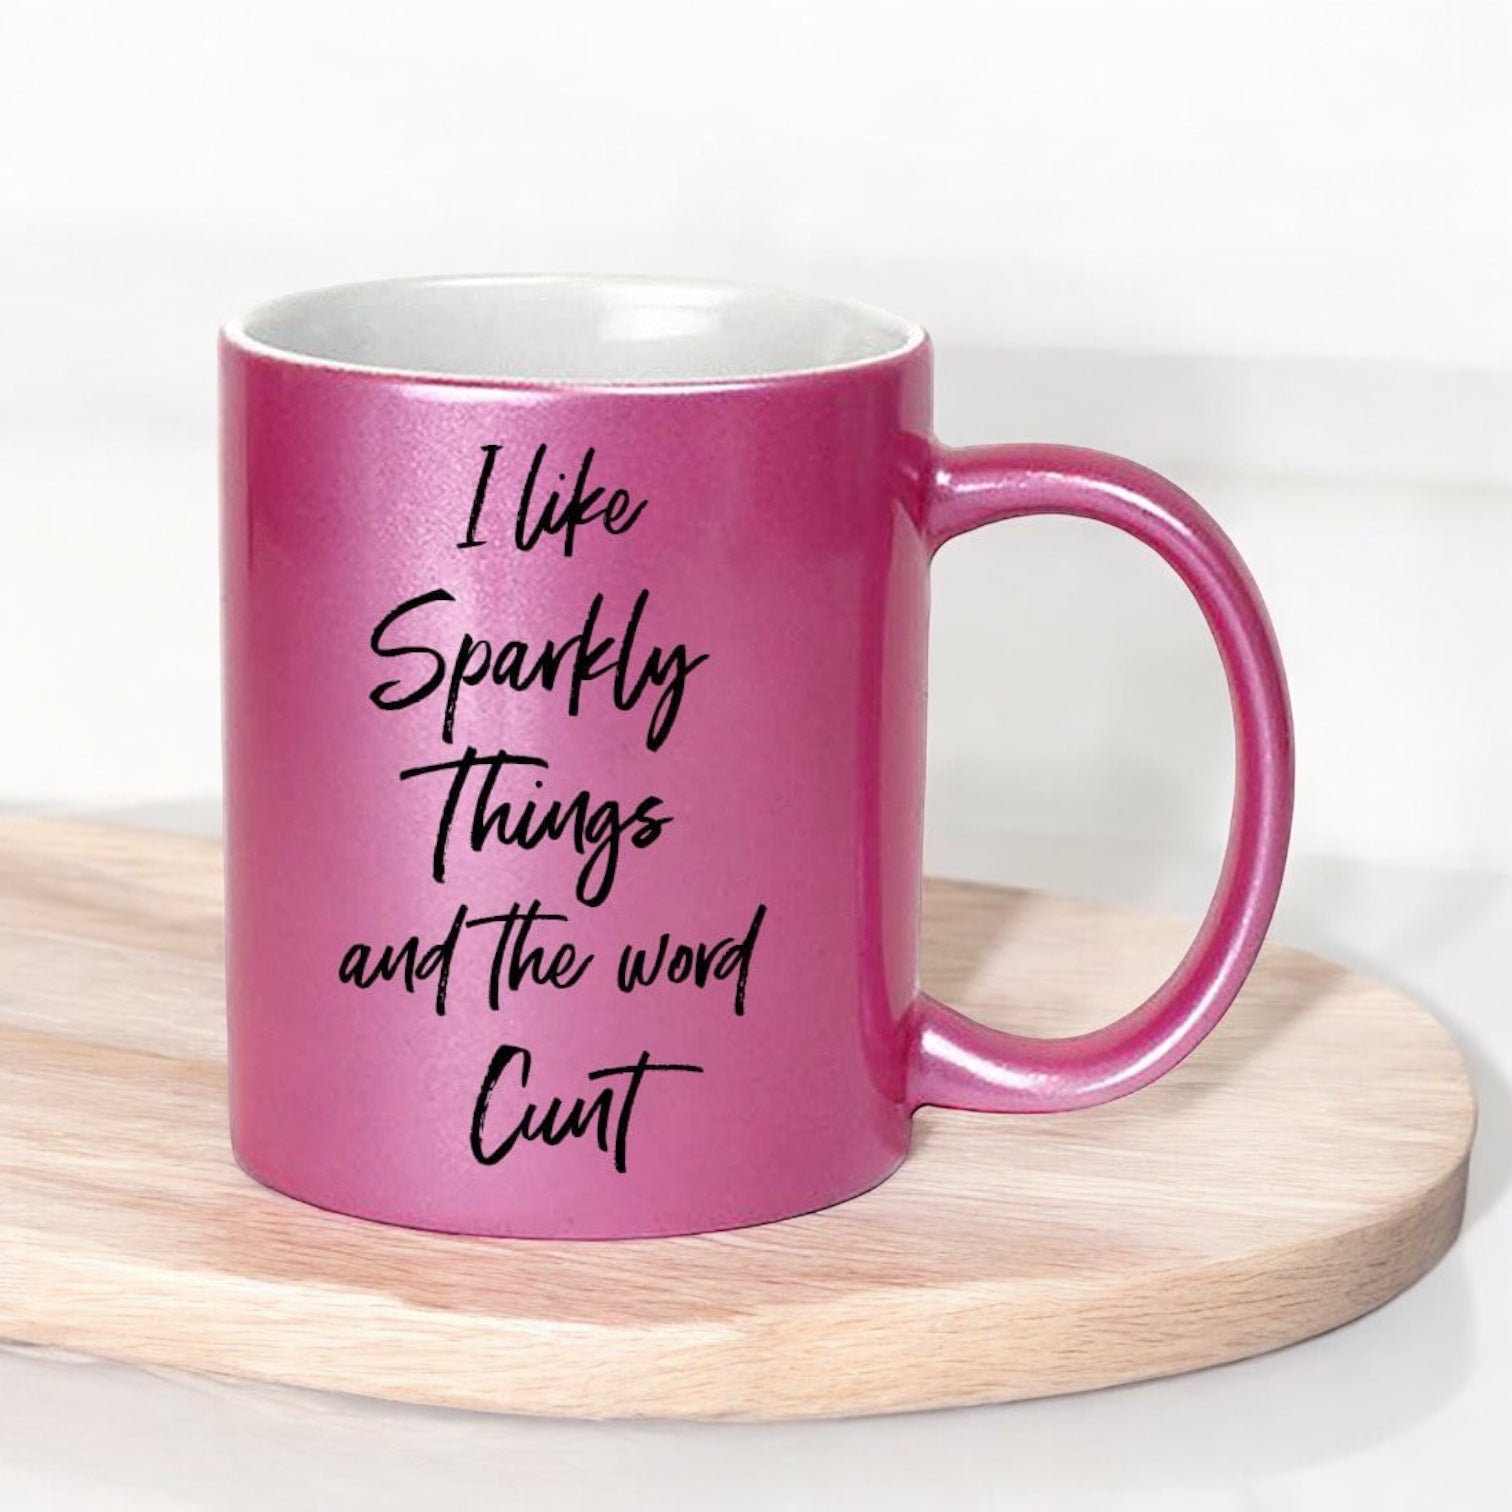 TIGC The Inappropriate Gift Co I like sparkly things and the word cunt mug